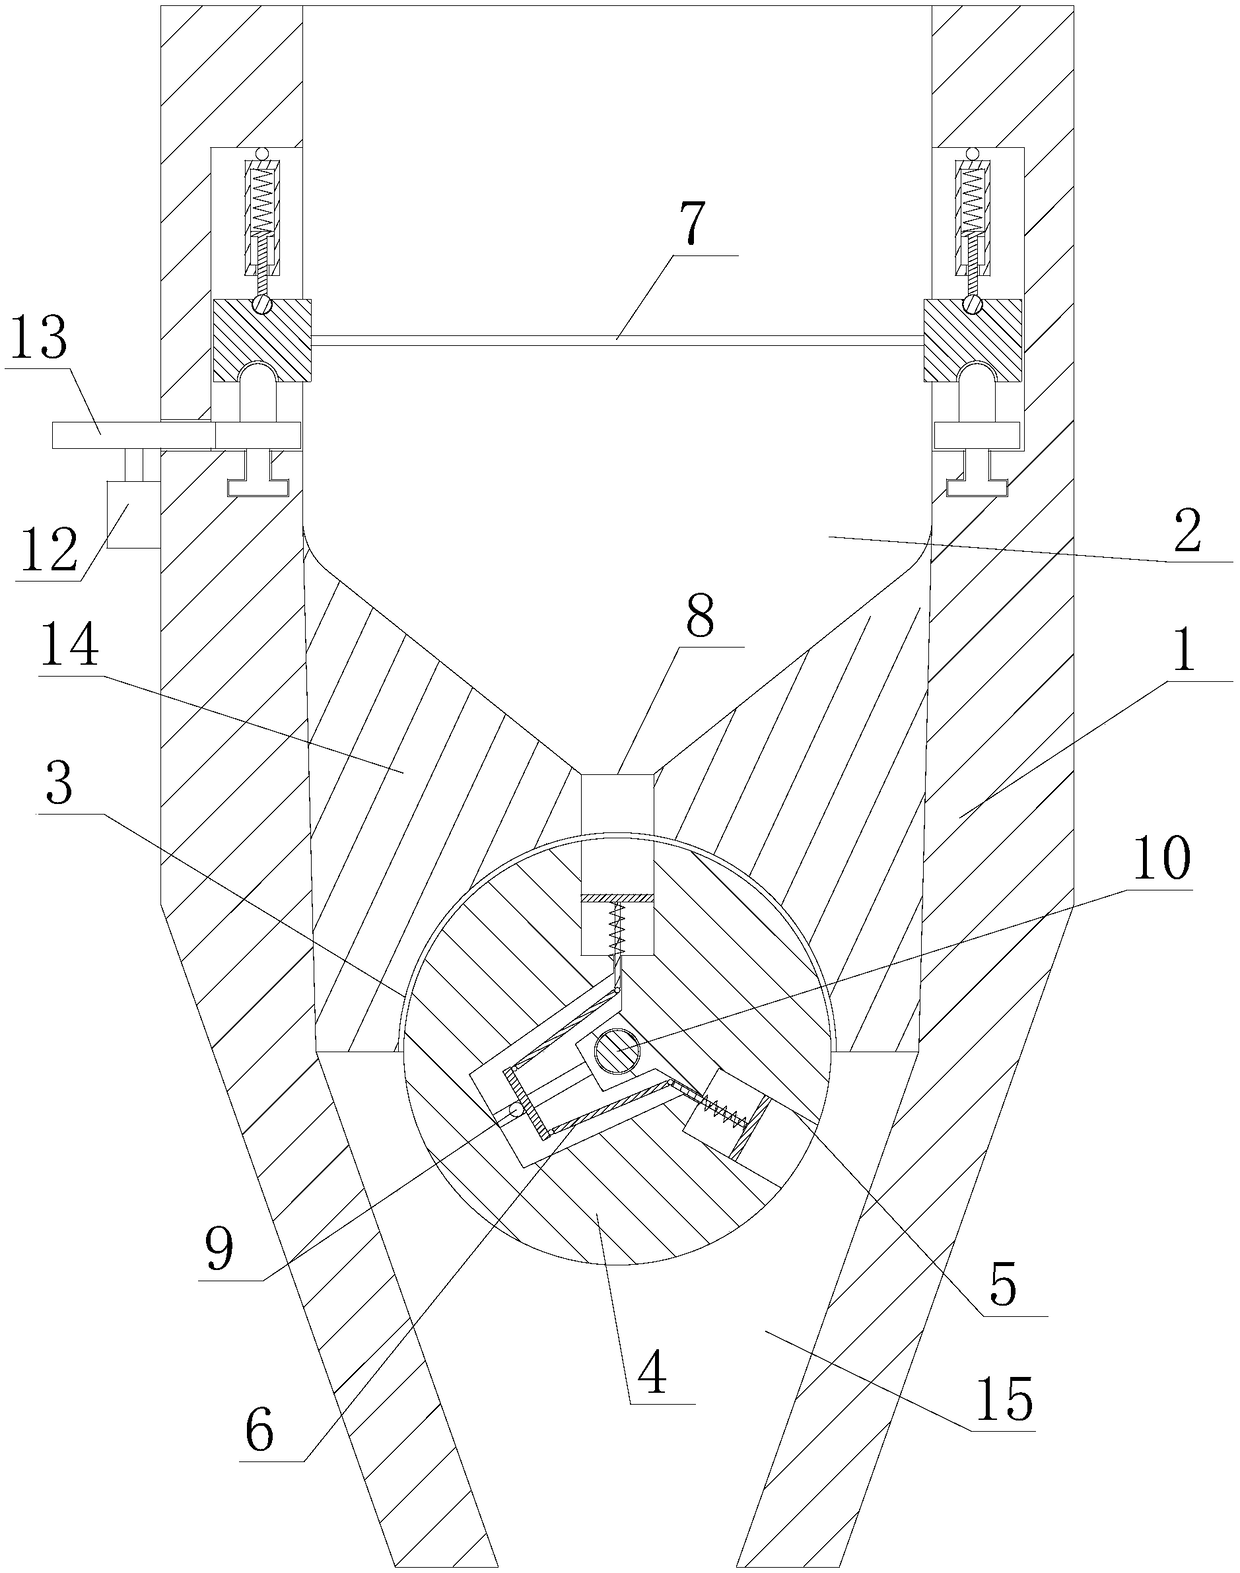 Powder spreading device capable of quantitatively dropping powder